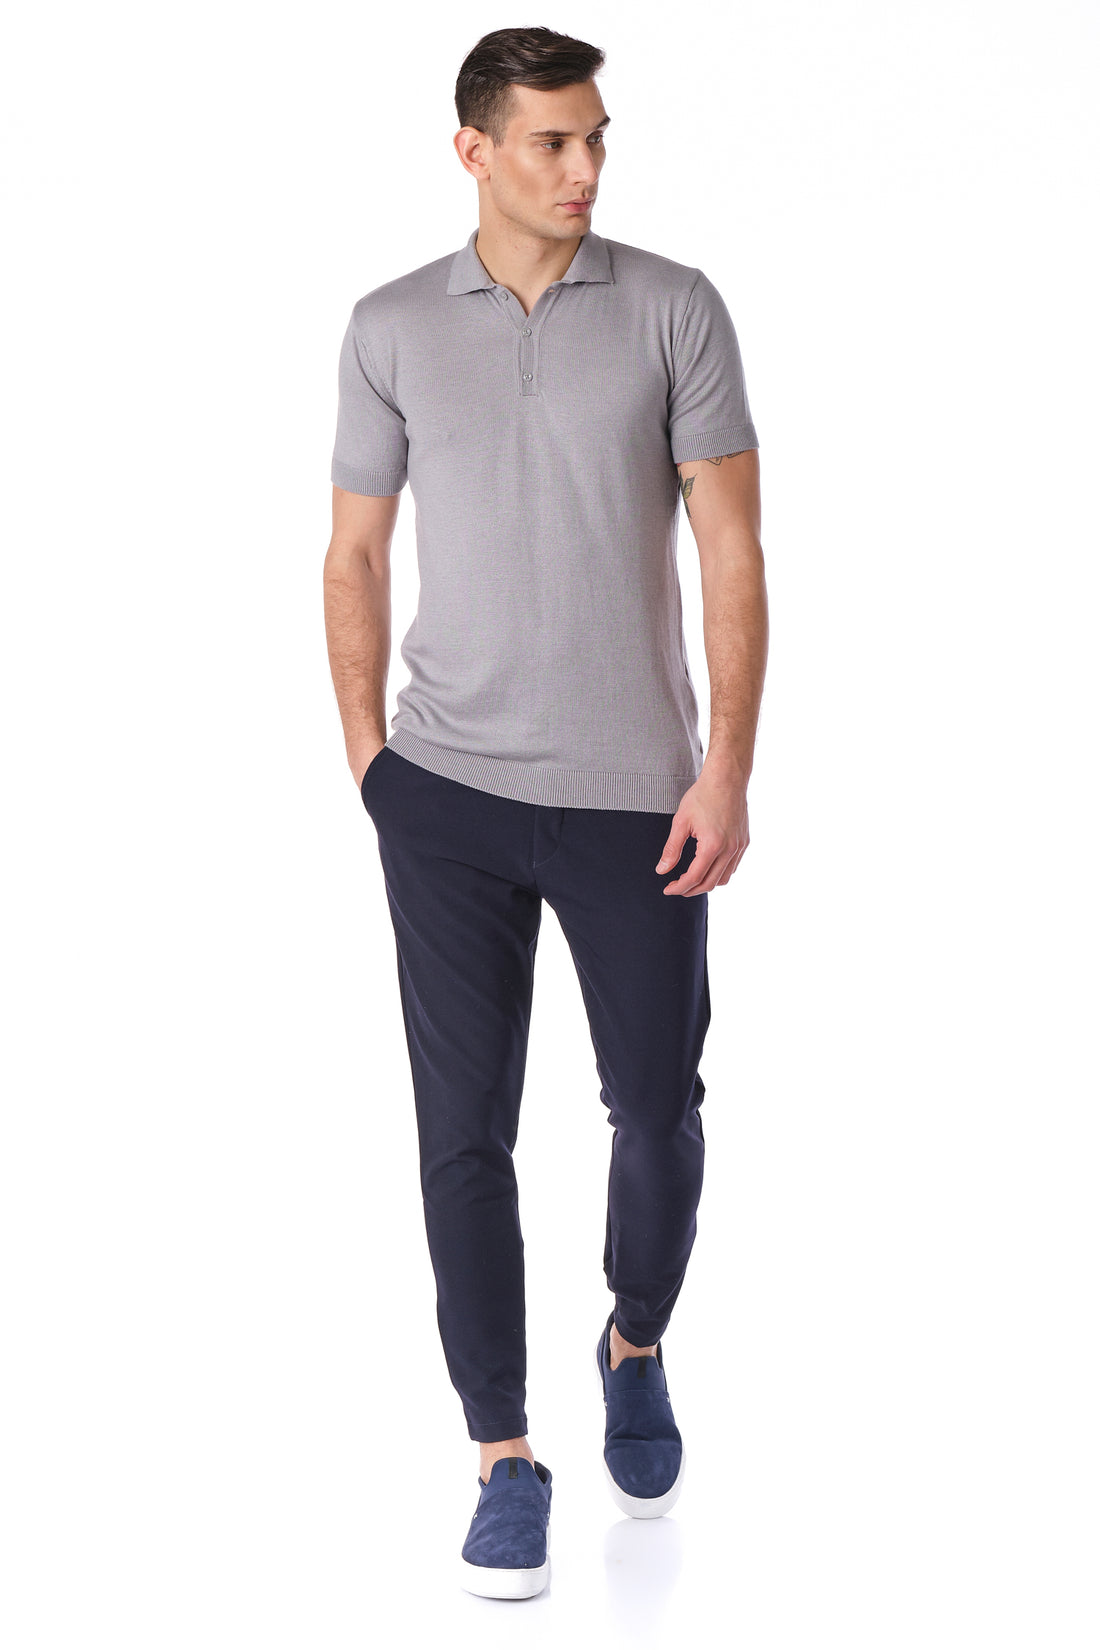 N° 6179 Knitted Polo Shirt  - Grey - Ron Tomson